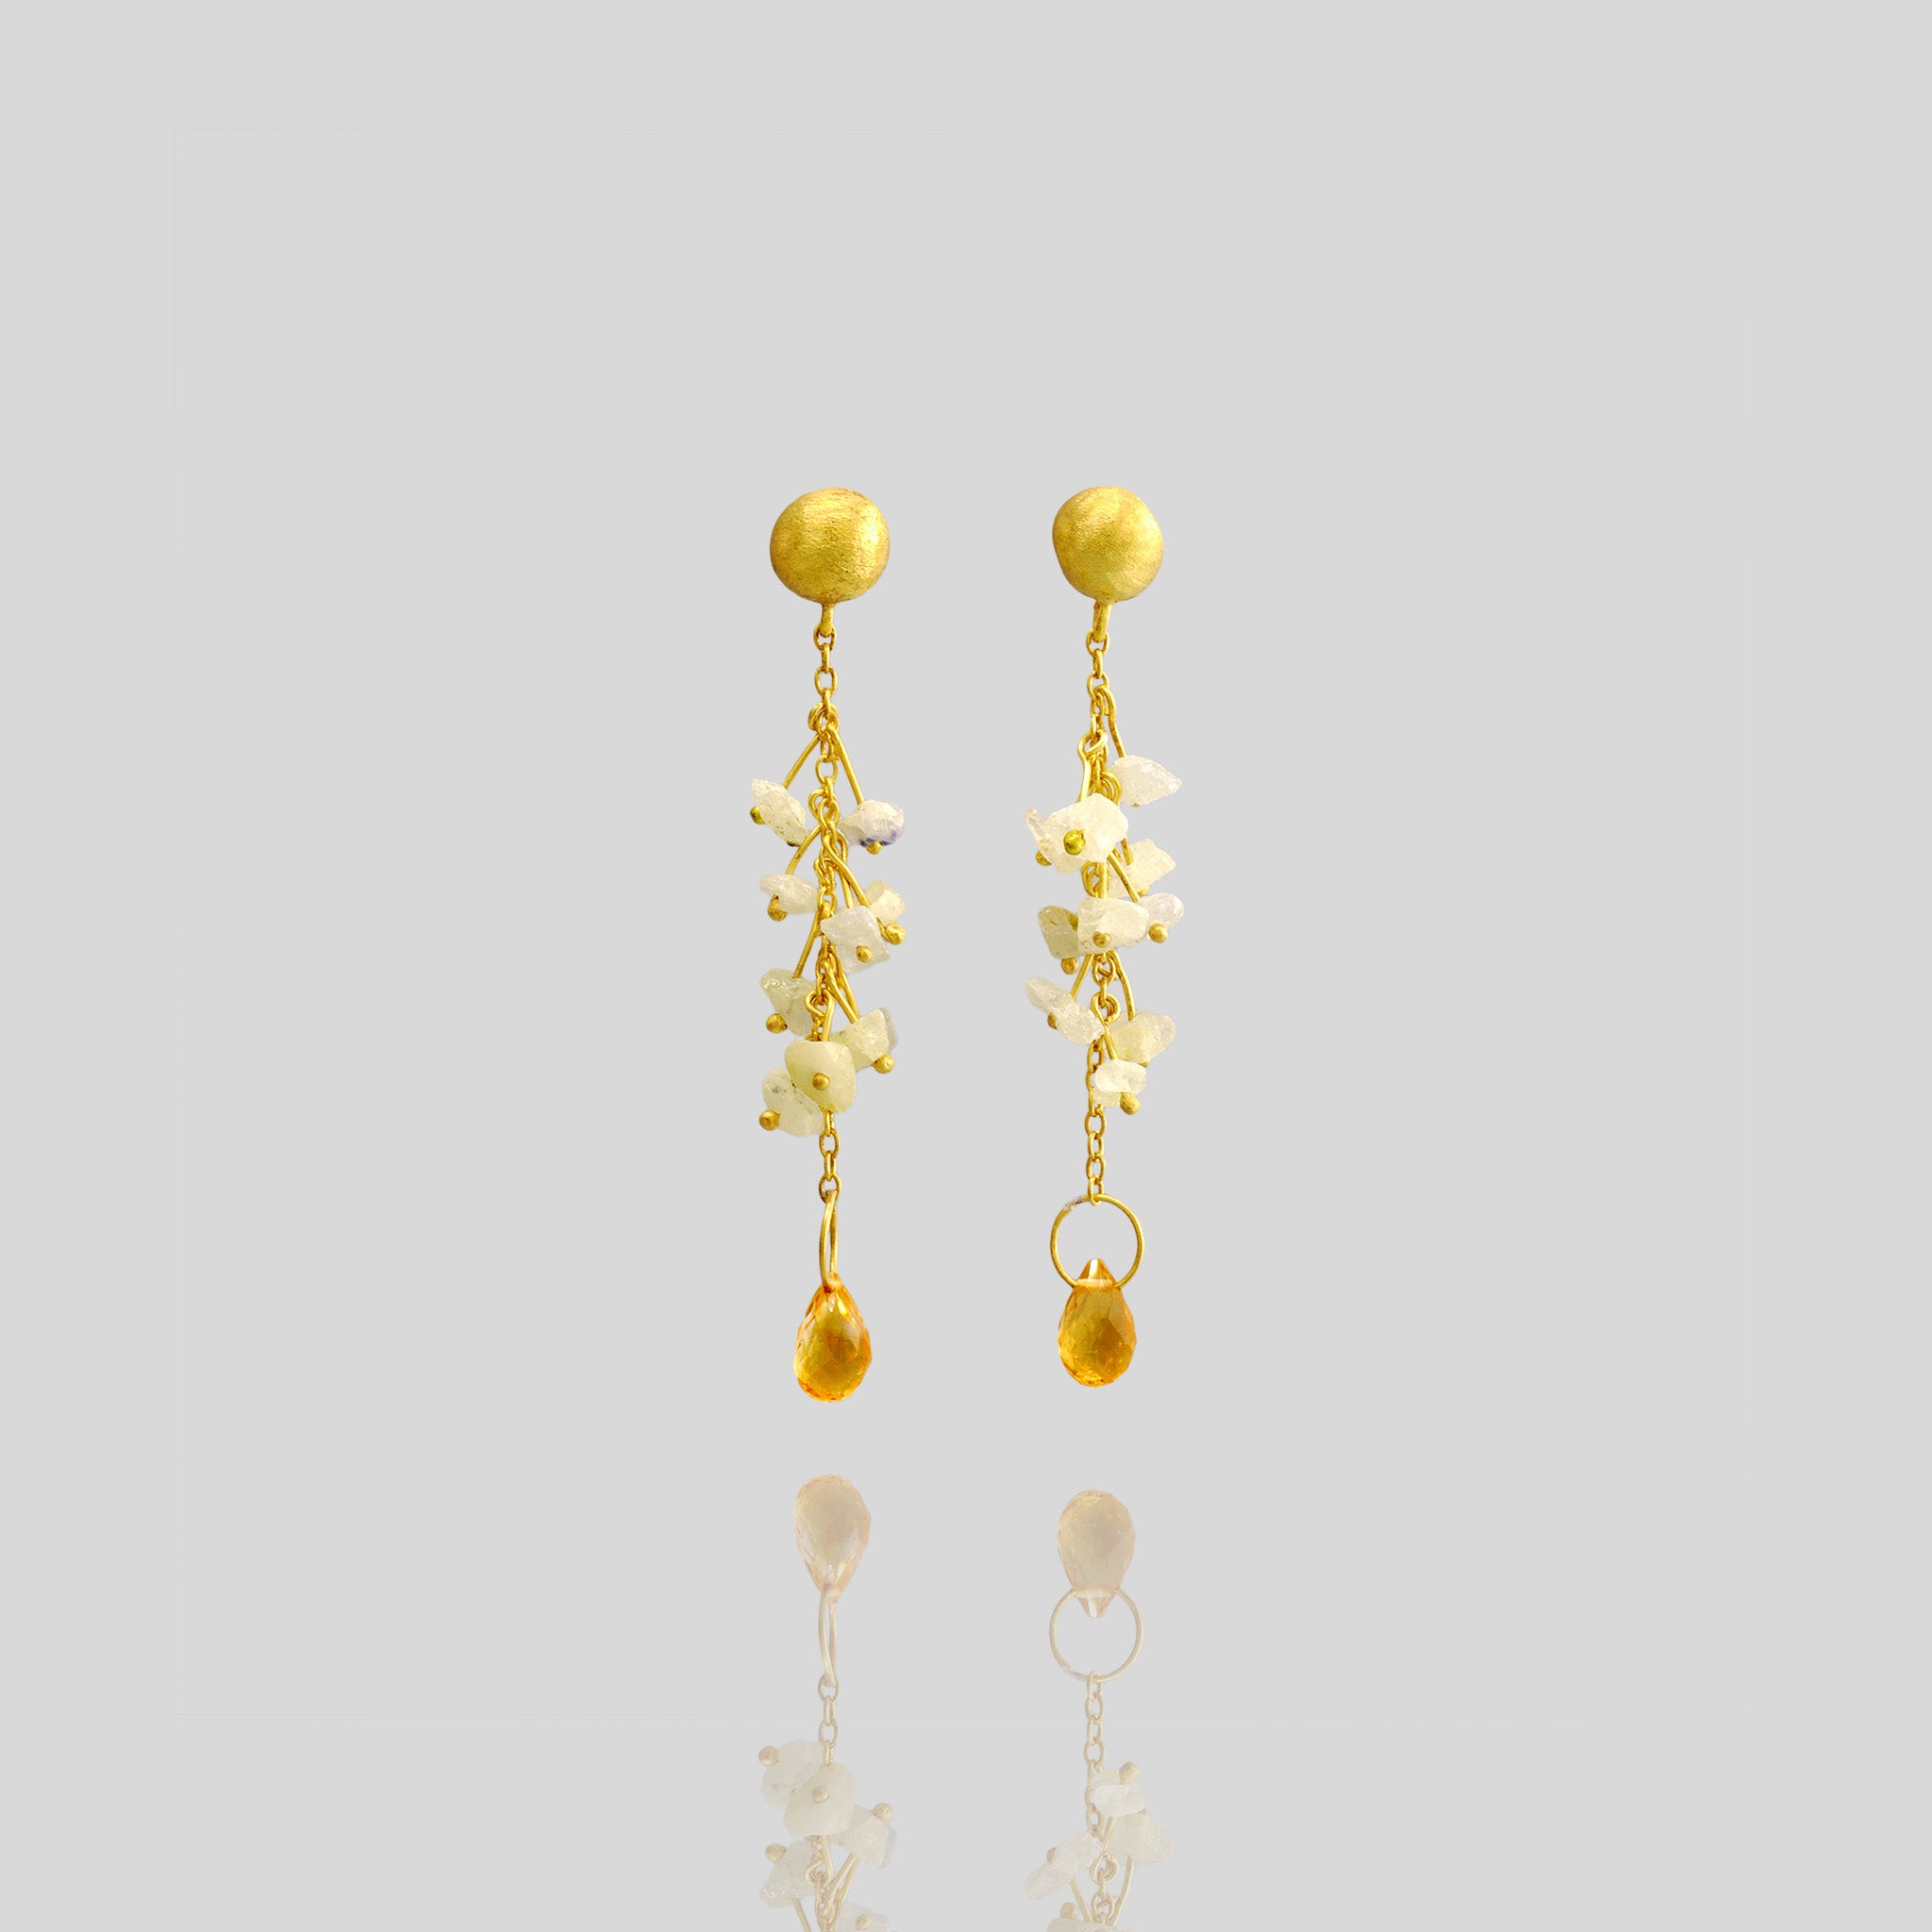 18k Yellow Gold Venus Earrings with raw white Sapphires and a Citrine drop, crafted for versatile elegance.